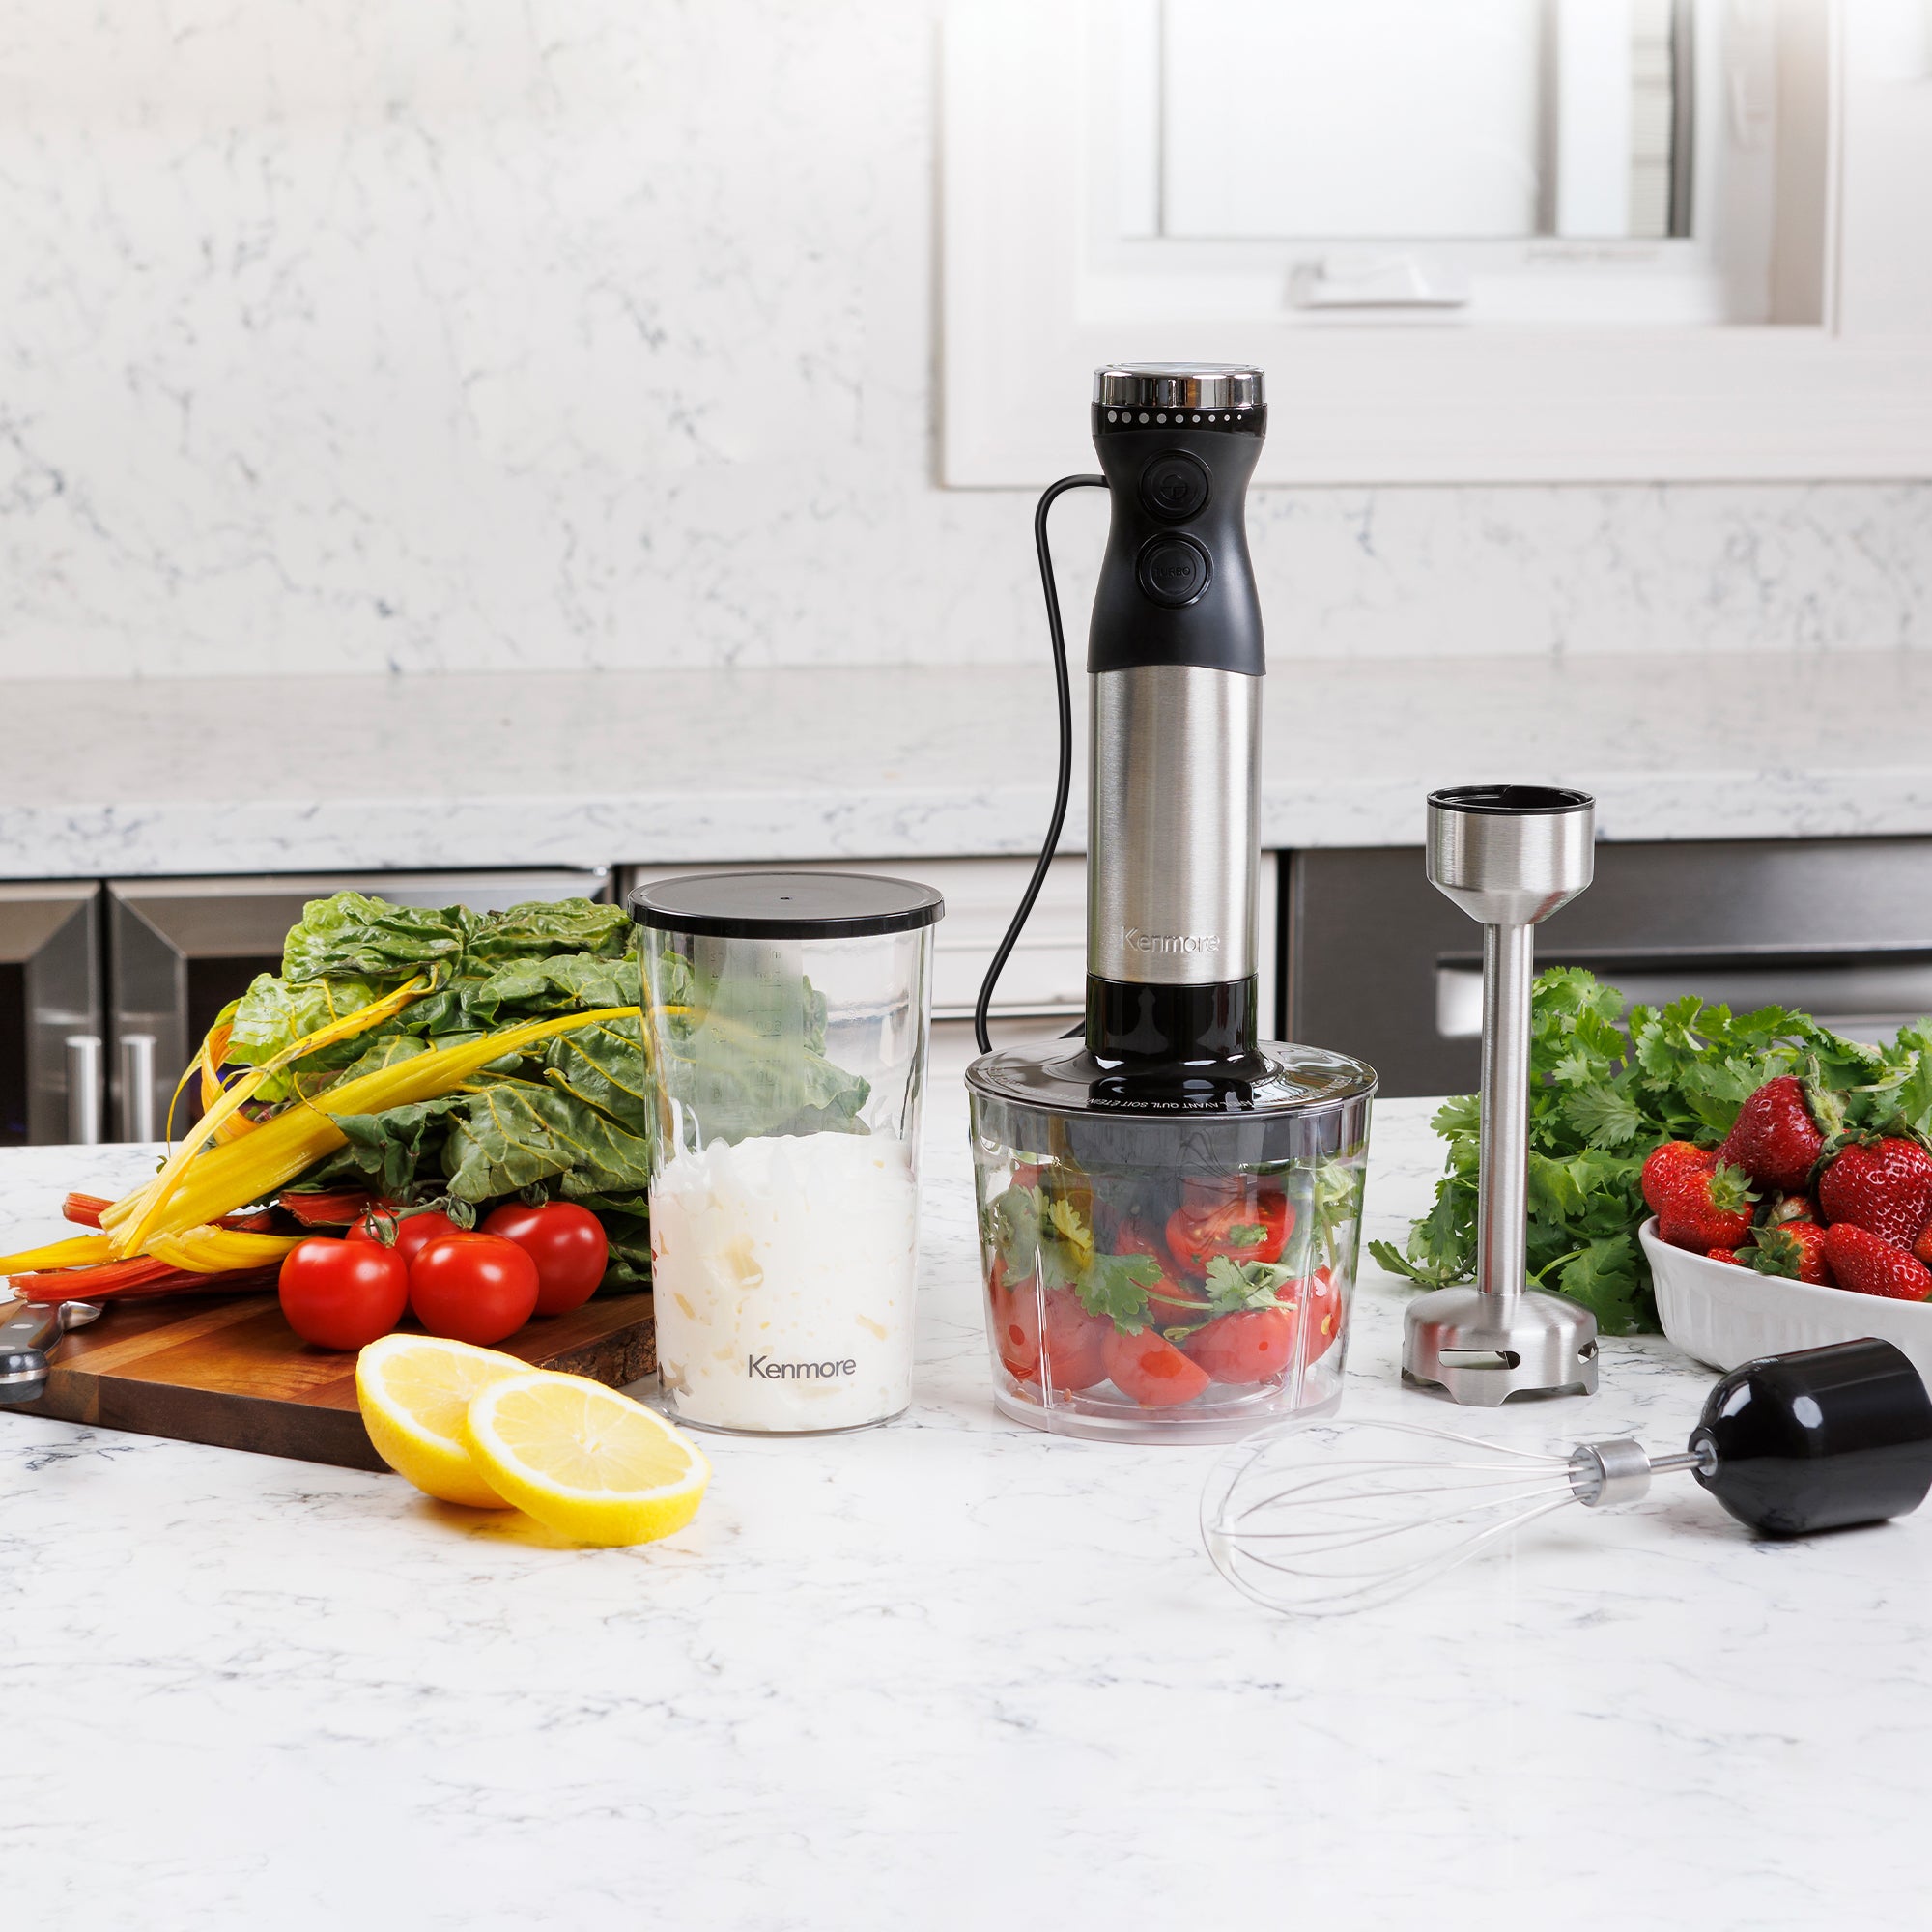 Kenmore hand blender and attachments surrounded by vegetables, greens, fruit, vegetables, and berries on a marbled white kitchen counter